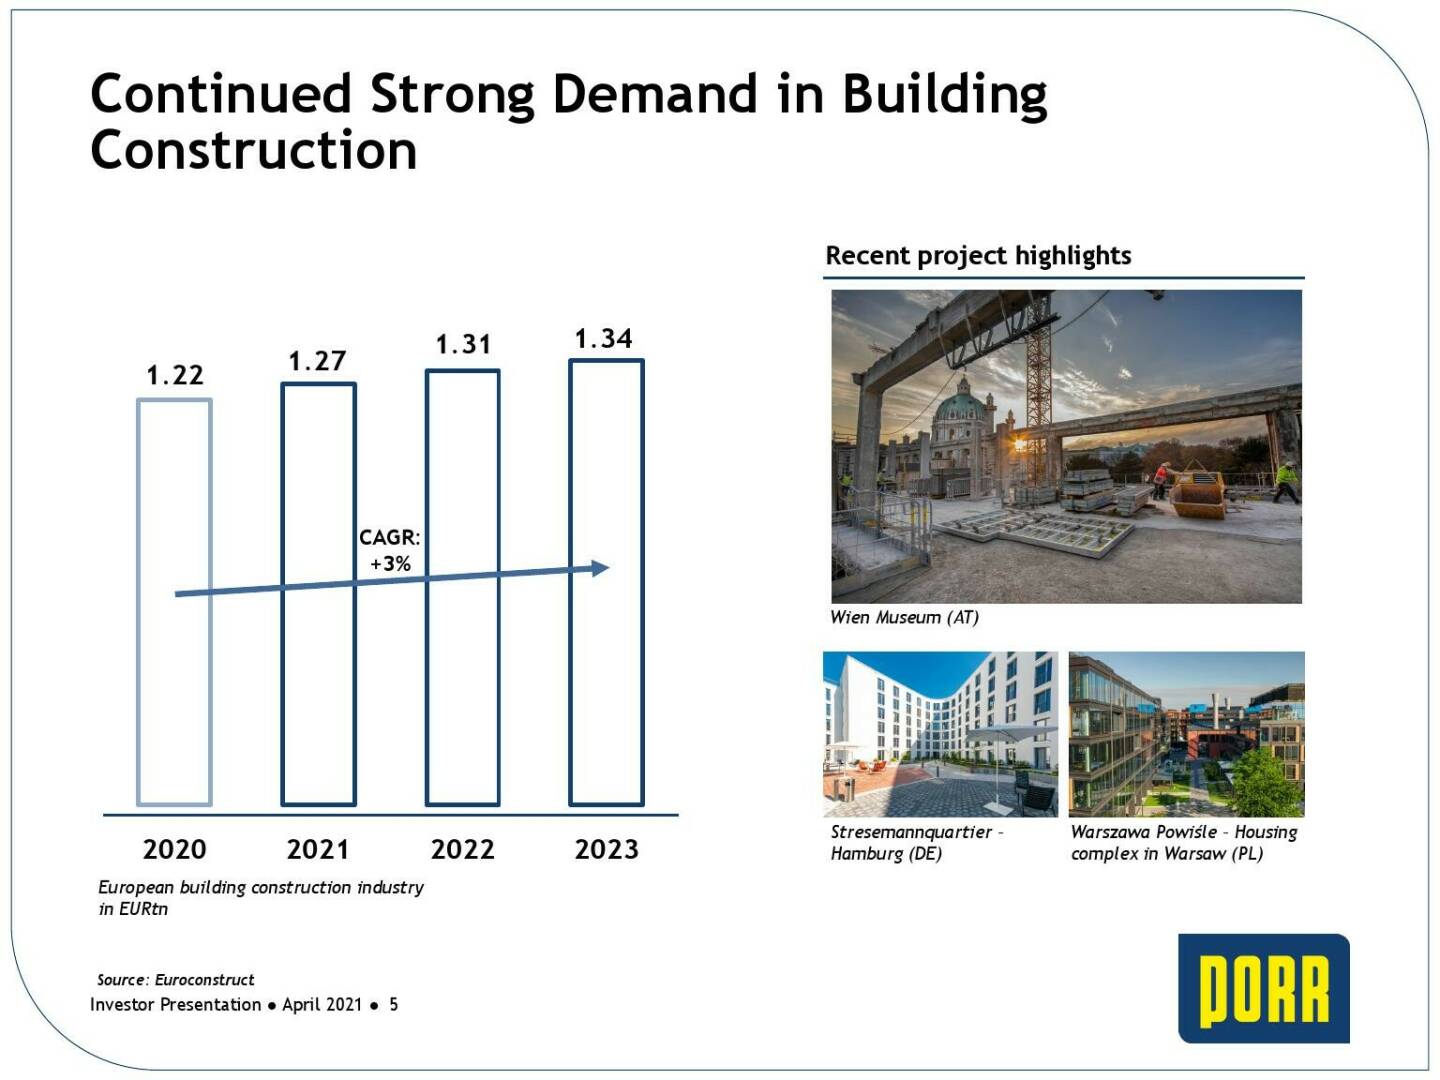 Porr - Continued strong demand in building construction 